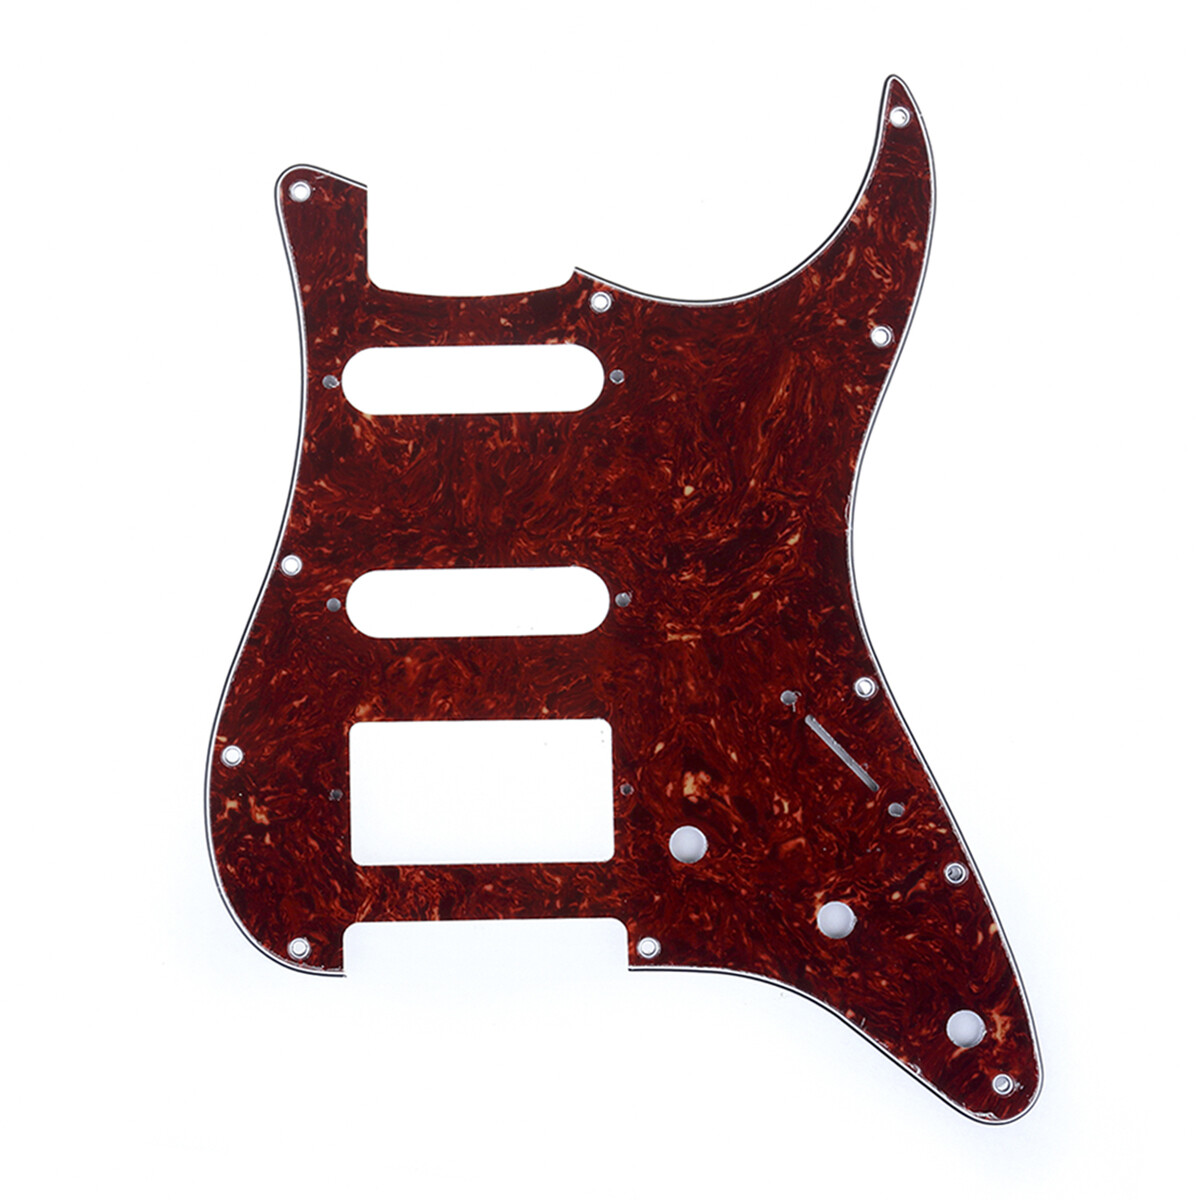 Brio 11-Hole Modern Style Strat HSS Pickguard for American Stratocaster Brown Tortoise Shell